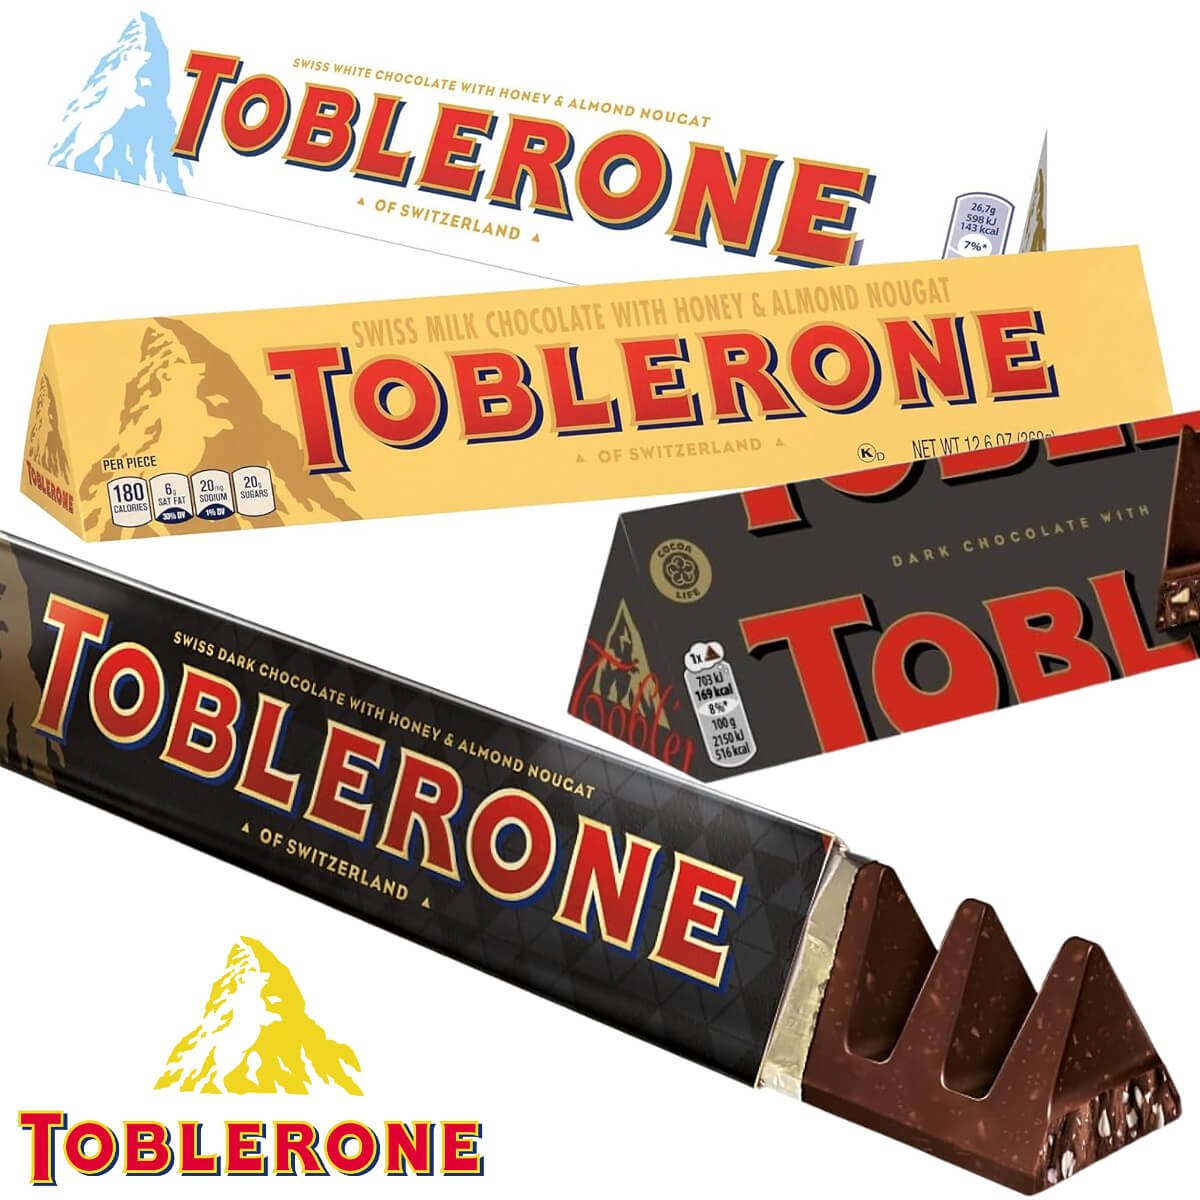 Selection of Toblerone chocolate bars. White, milk and dark, with logo